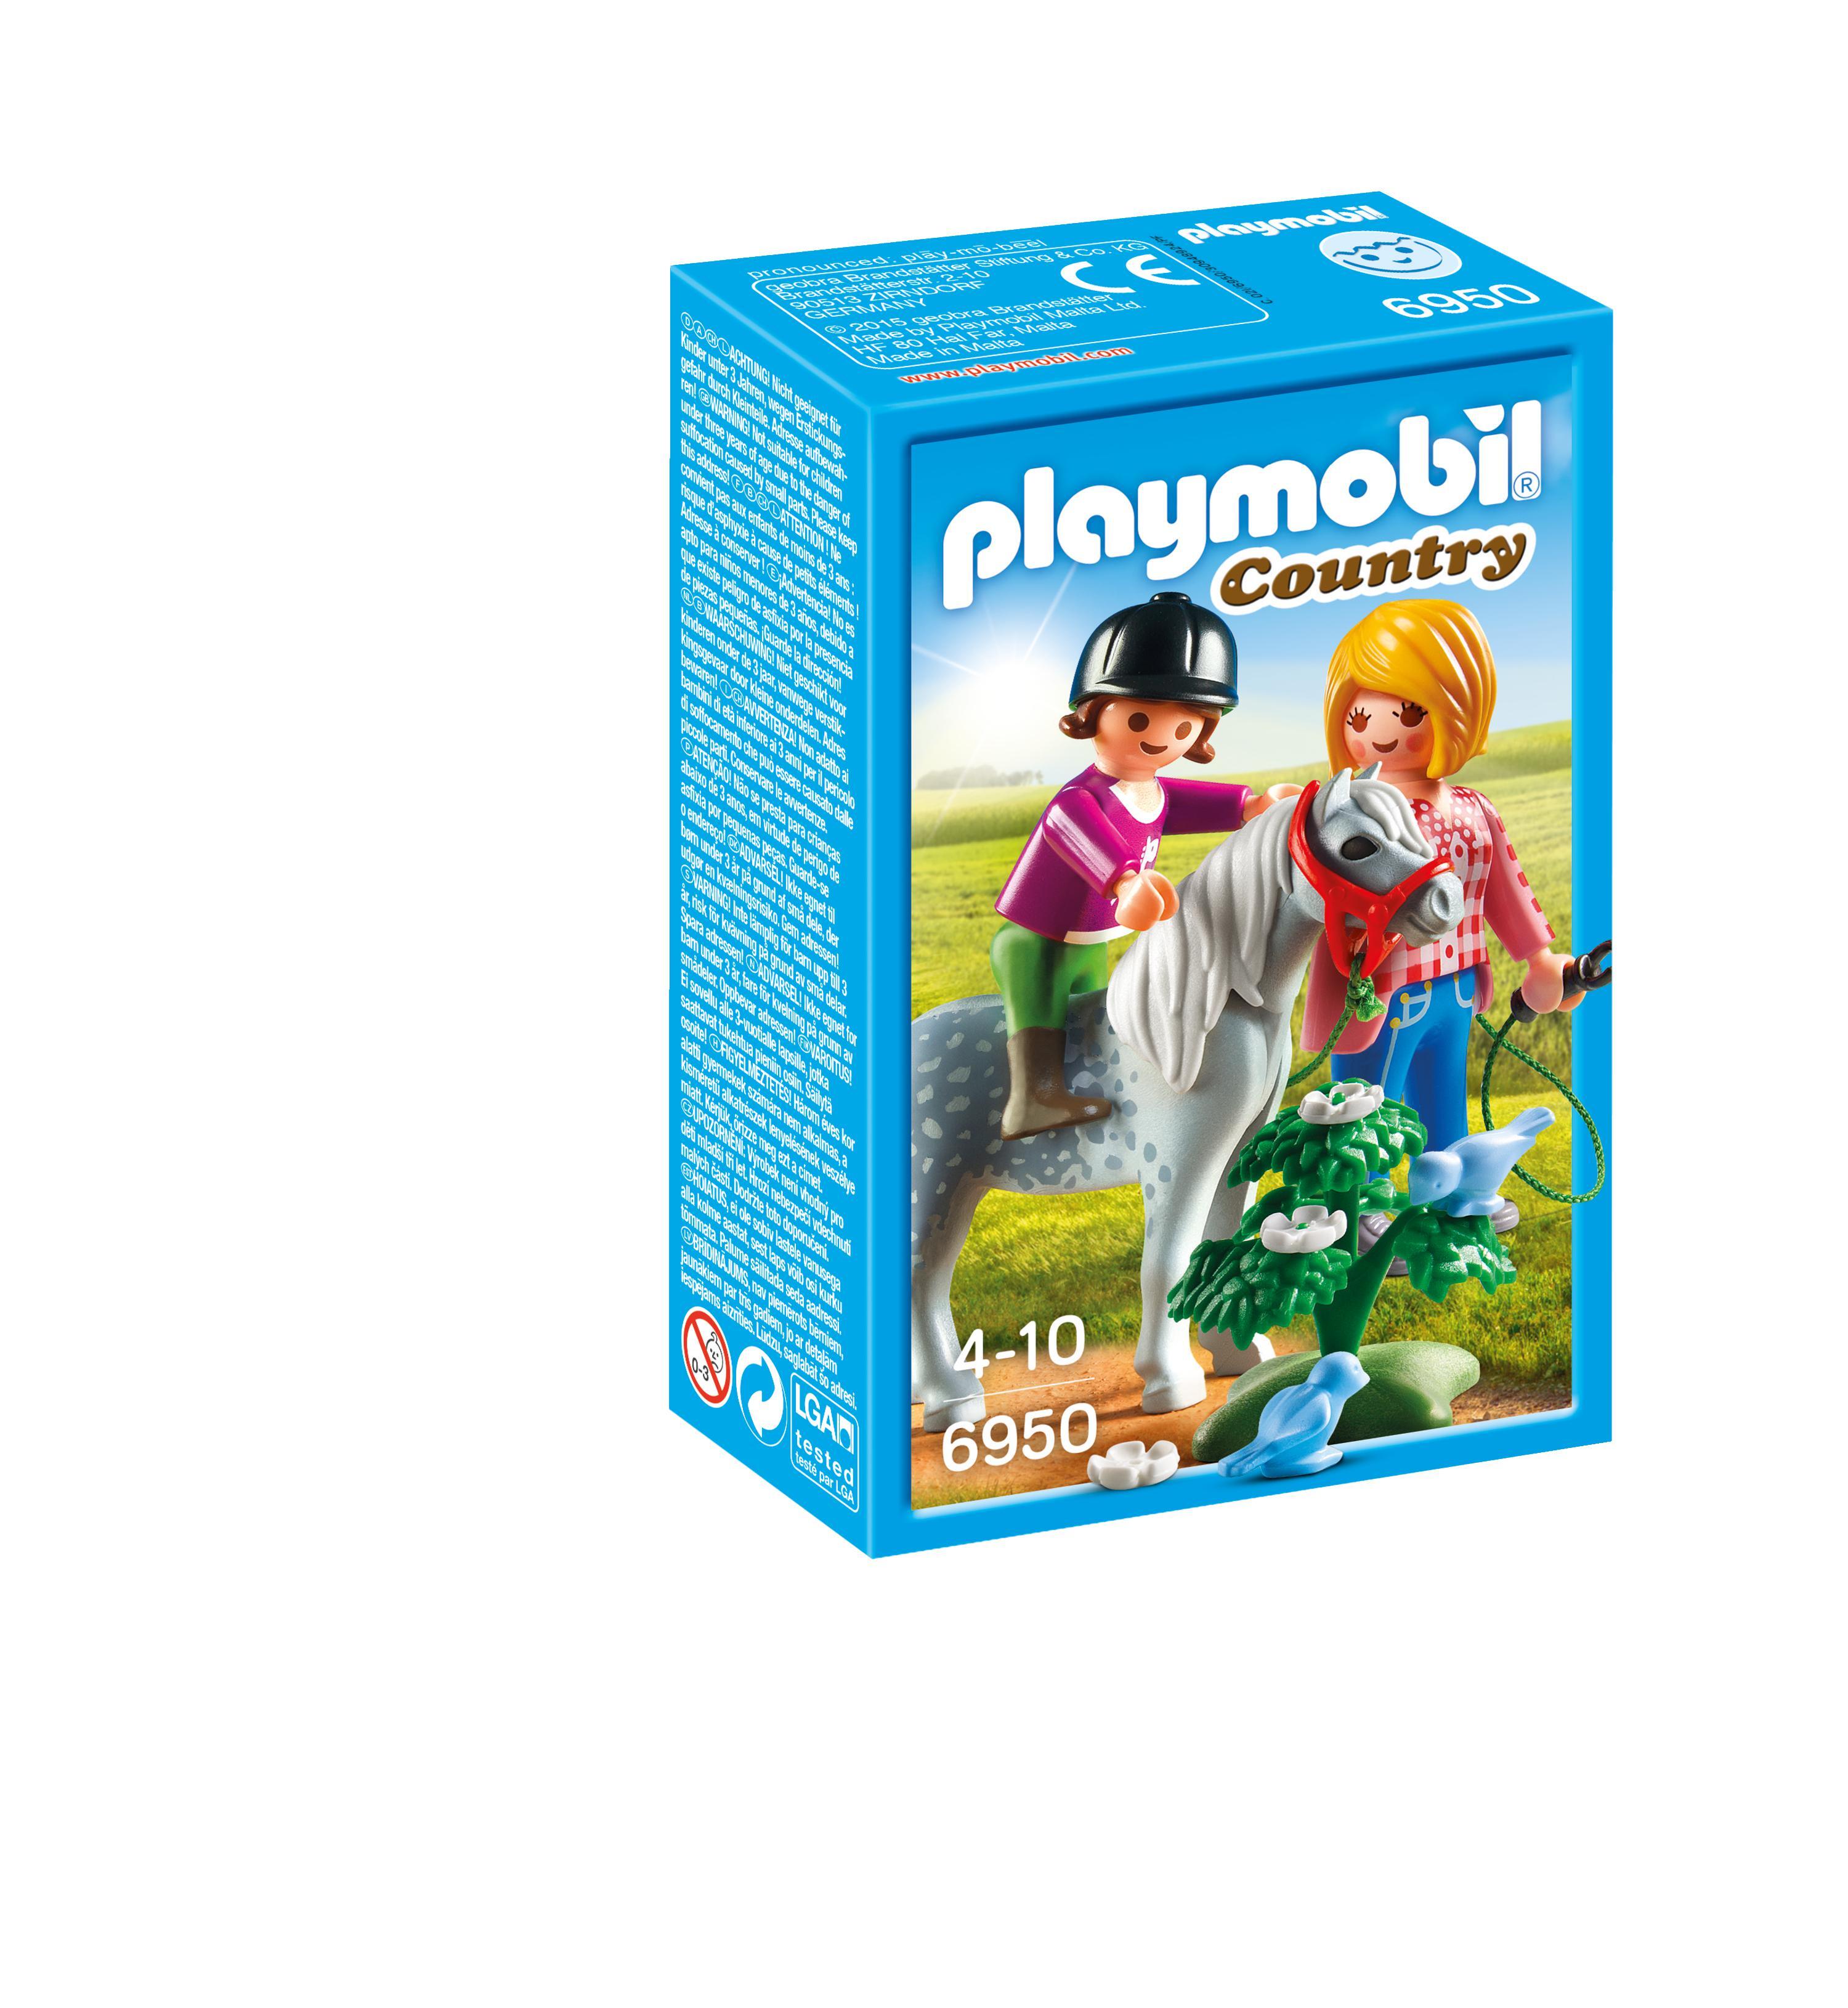 playmobil Country 6950